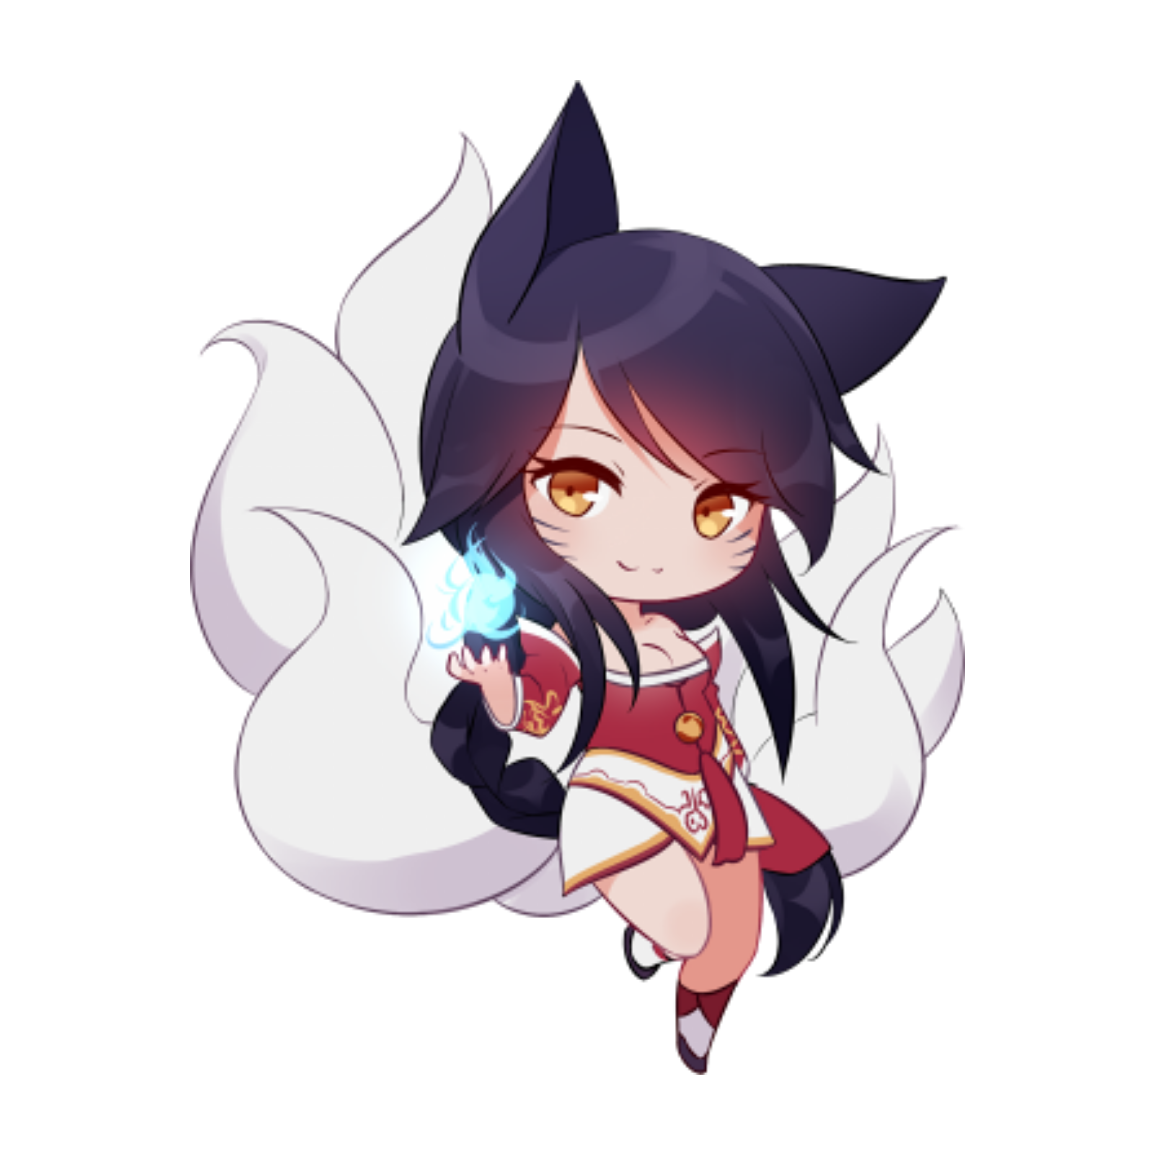 Cute Chibi Anime Wolf Girl - chibi wolf girl roblox download anime wolf girl drawing free transparent png clipart images download